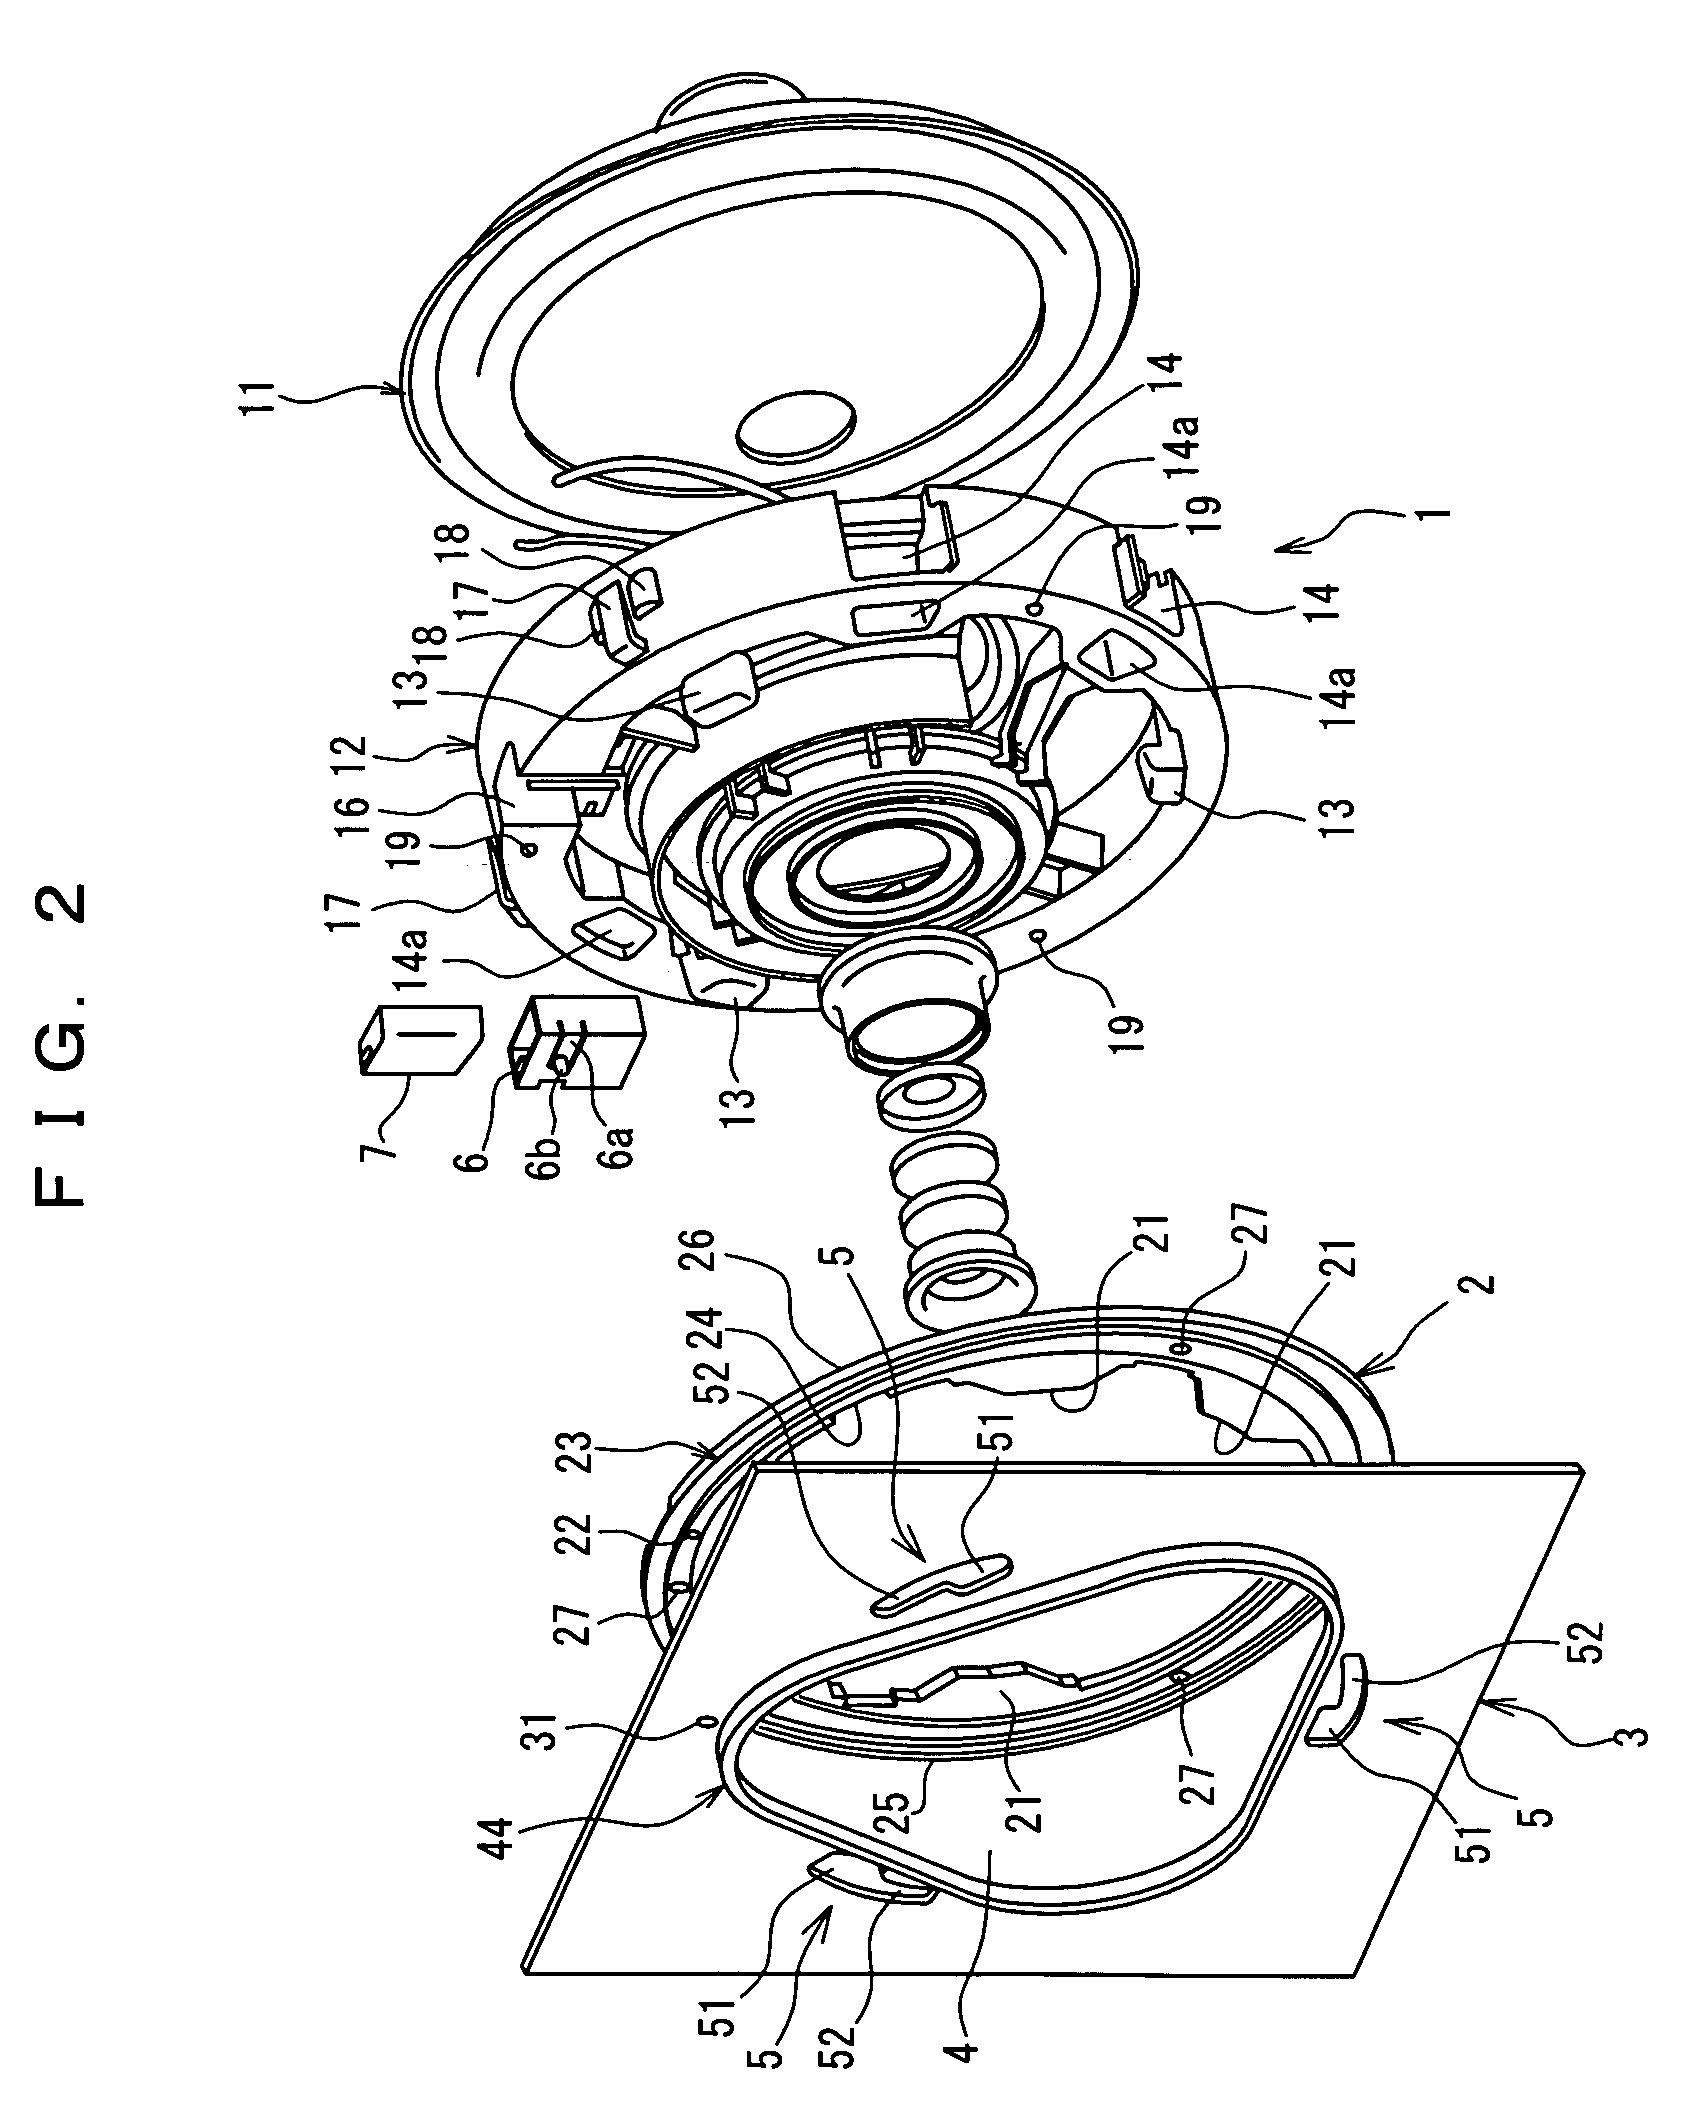 Speaker for vehicle and mounting structure of the speaker